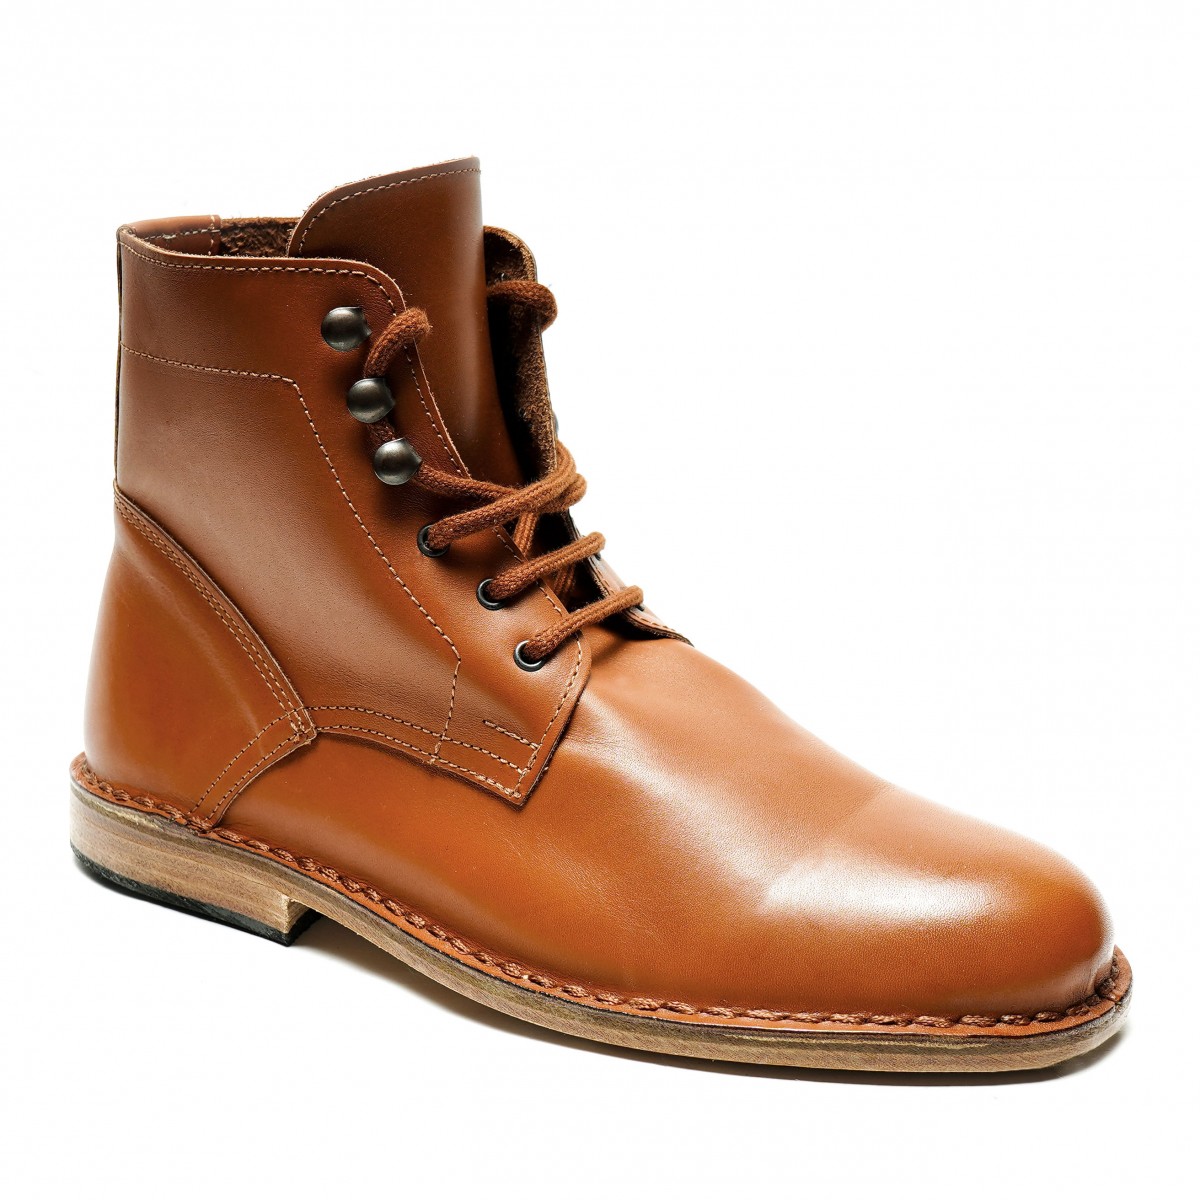 Handmade Leather Boots Mens | escapeauthority.com